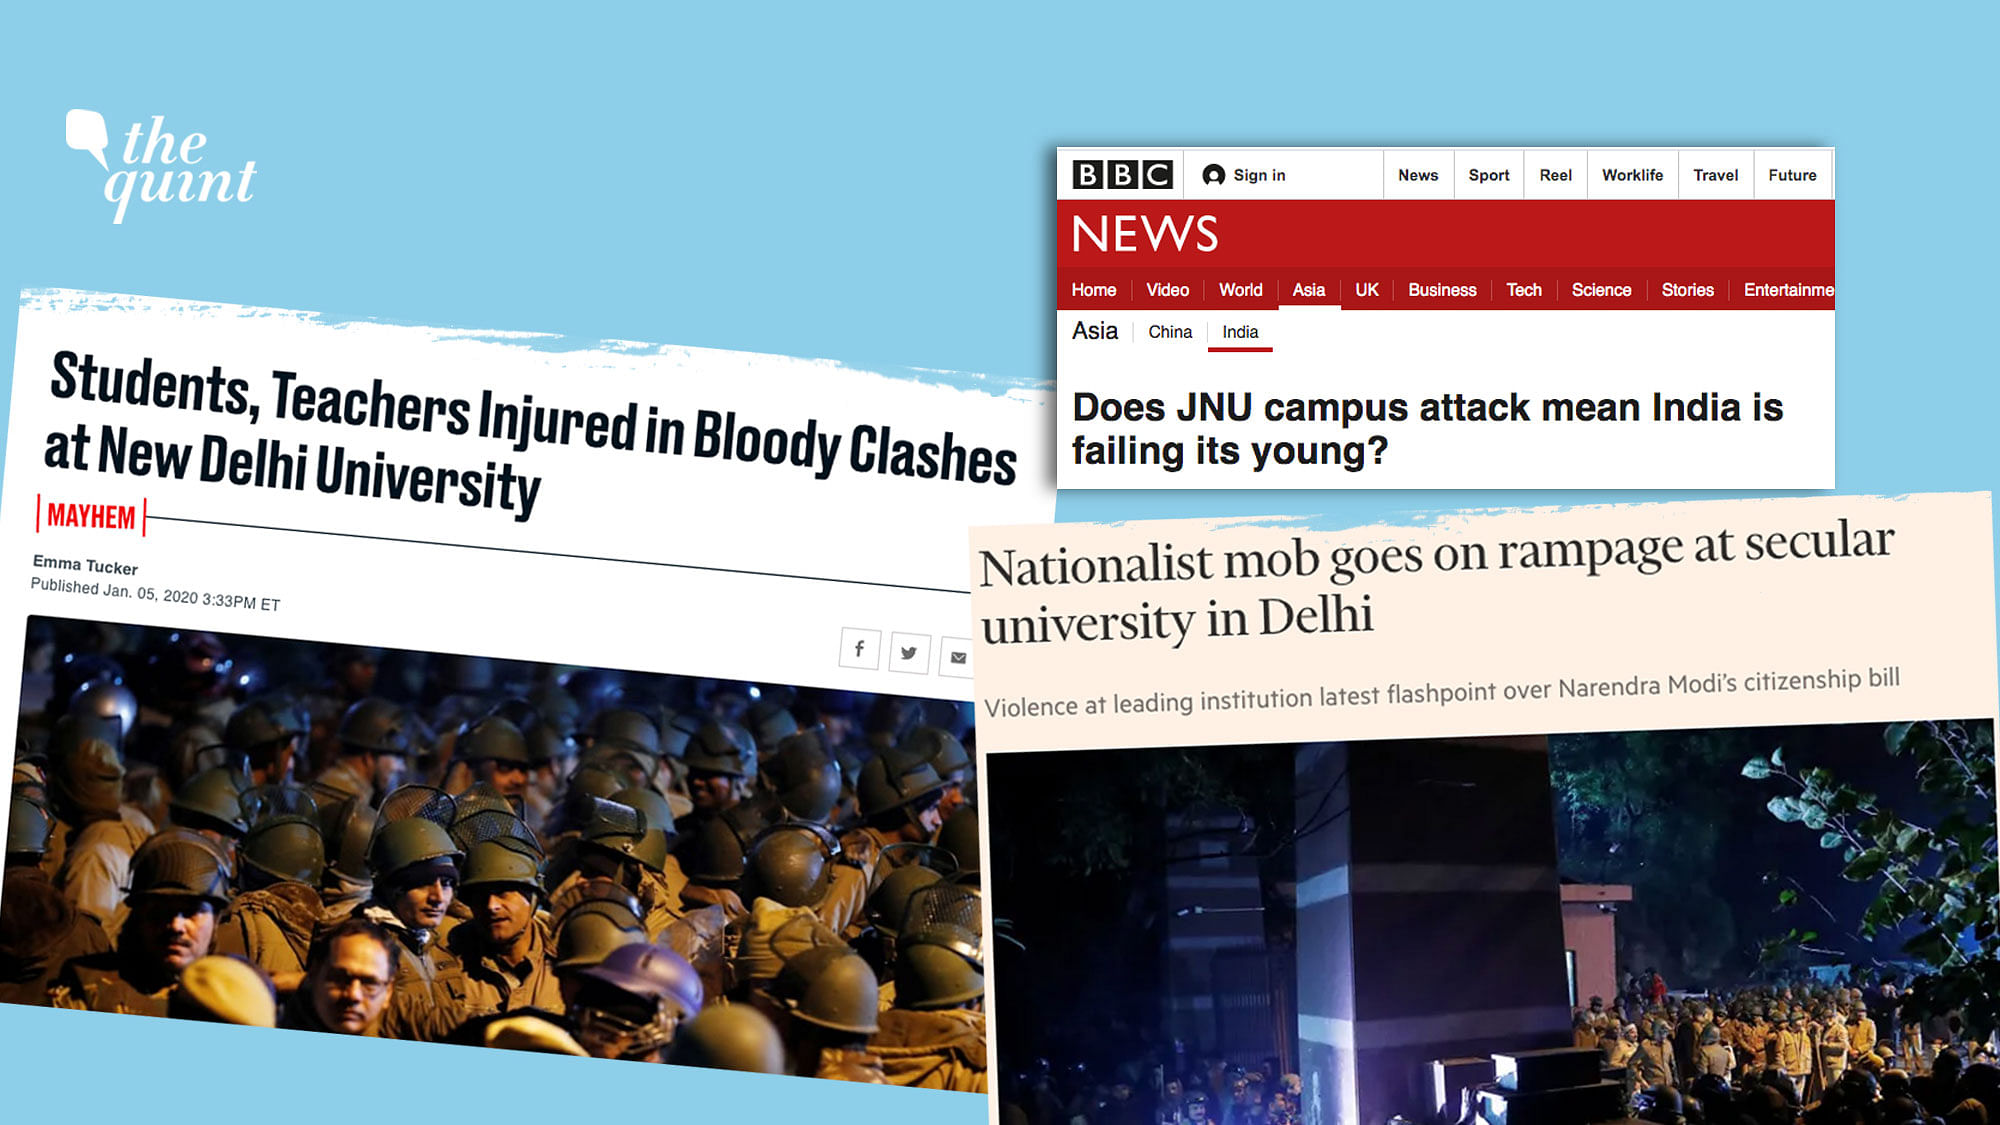 How did foreign media see the unprecedented attacks amid police inaction in one of India’s premier universities?